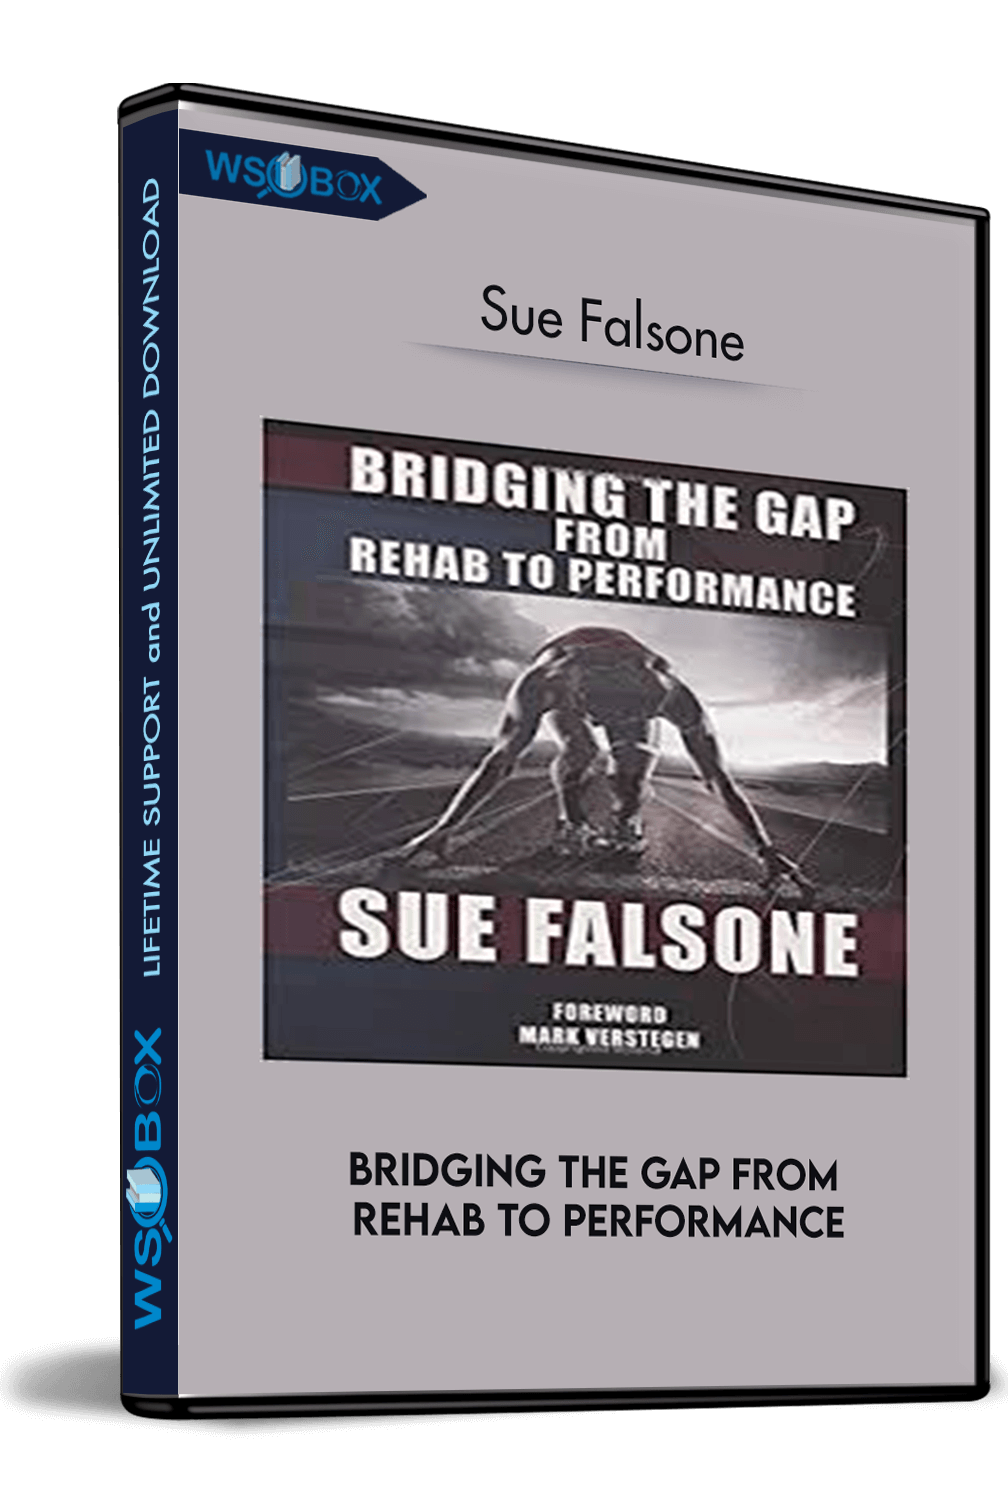 bridging-the-gap-from-rehab-to-performance-sue-falsone